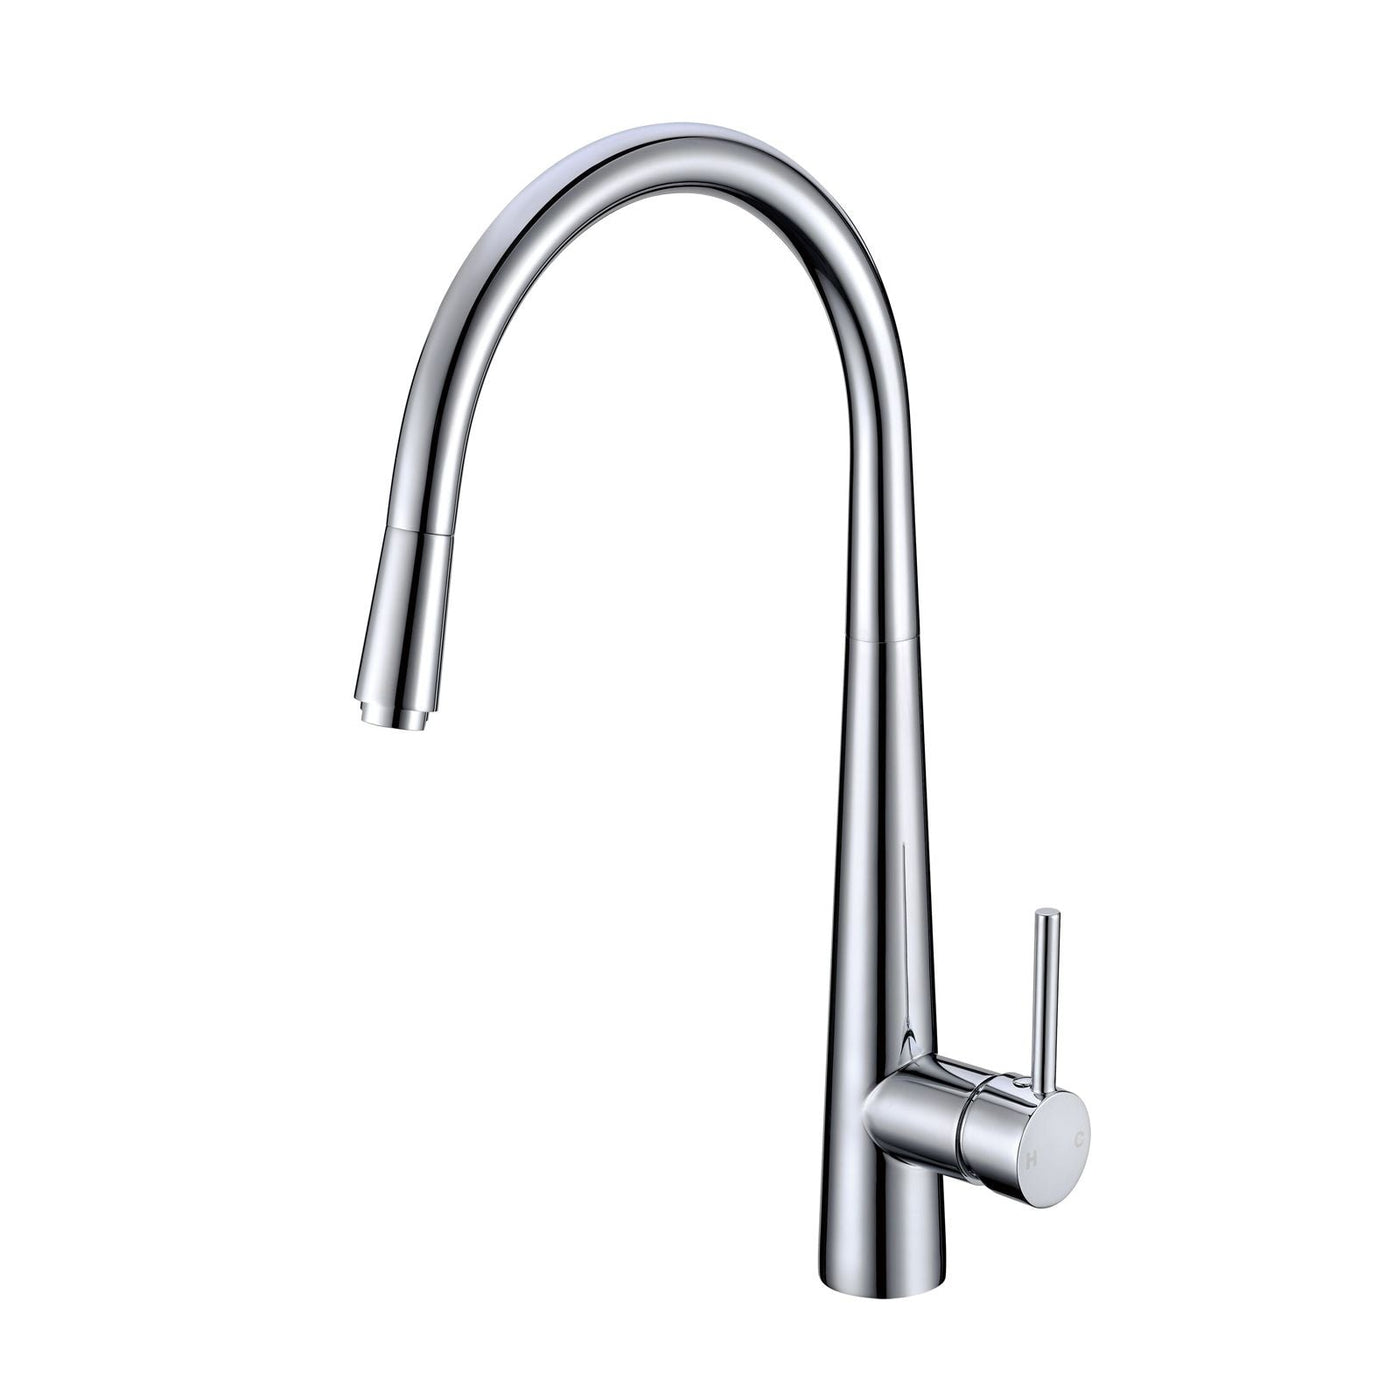 Round Chrome 360° Swivel Pull Out Kitchen Sink Mixer Tap